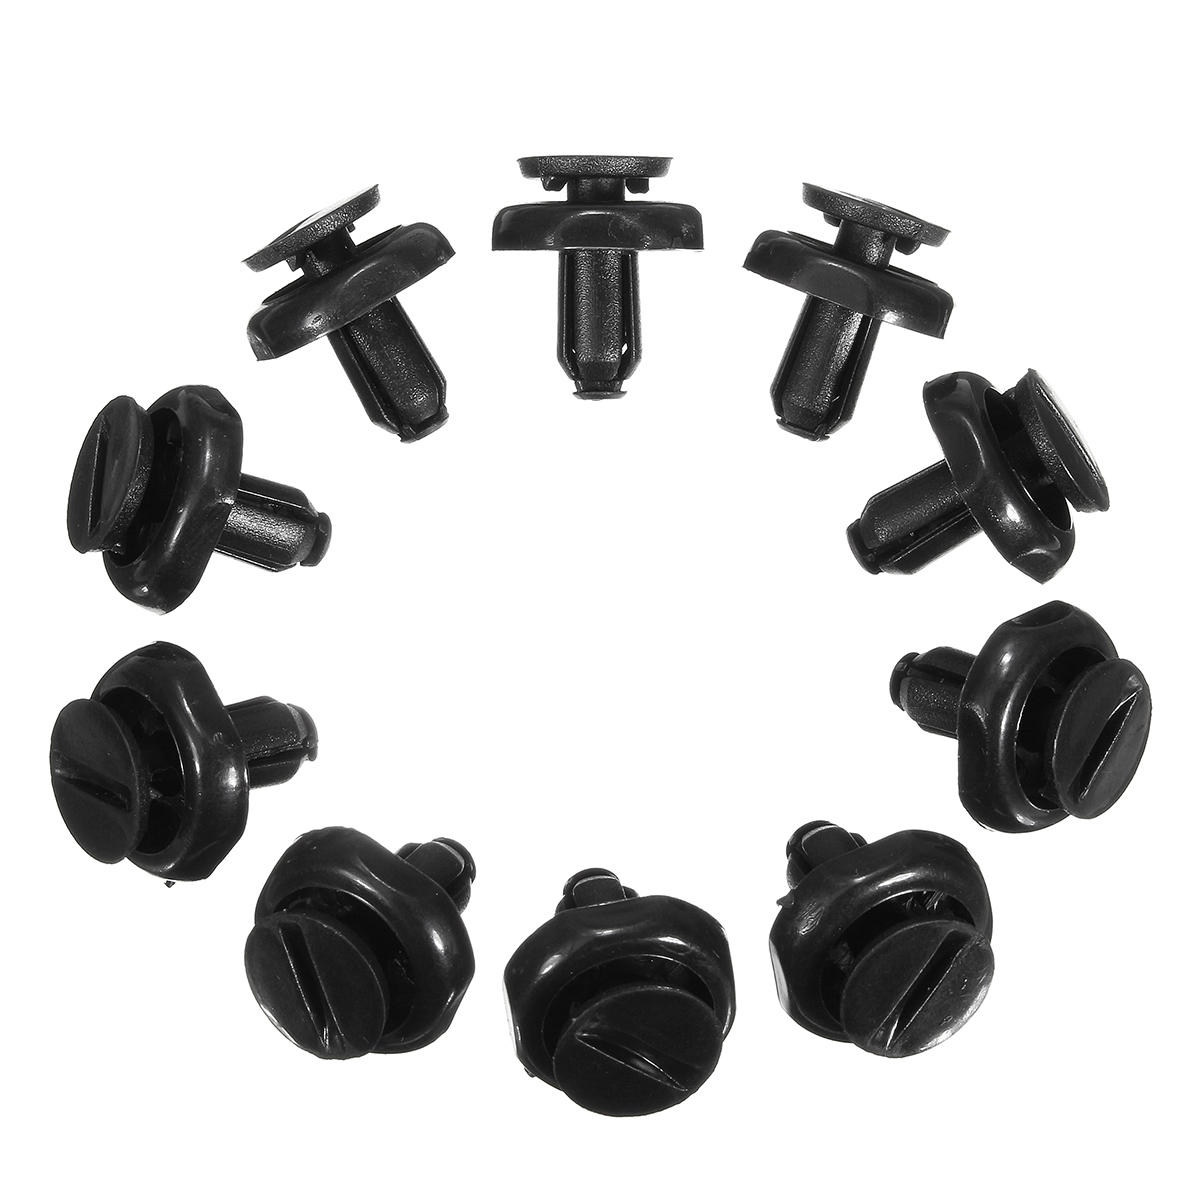 7mm?Radiator?Cover?Clips?Motor?Cover Trim Clips voor Toyota Avensis